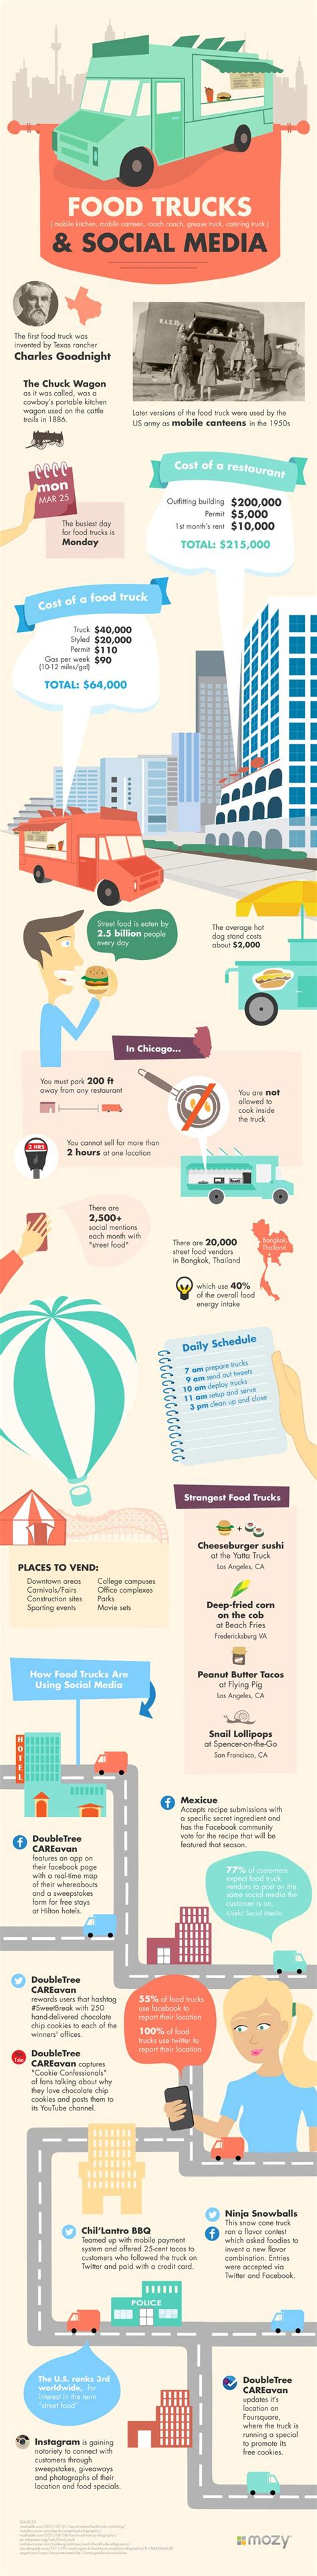 interesting facts about food trucks